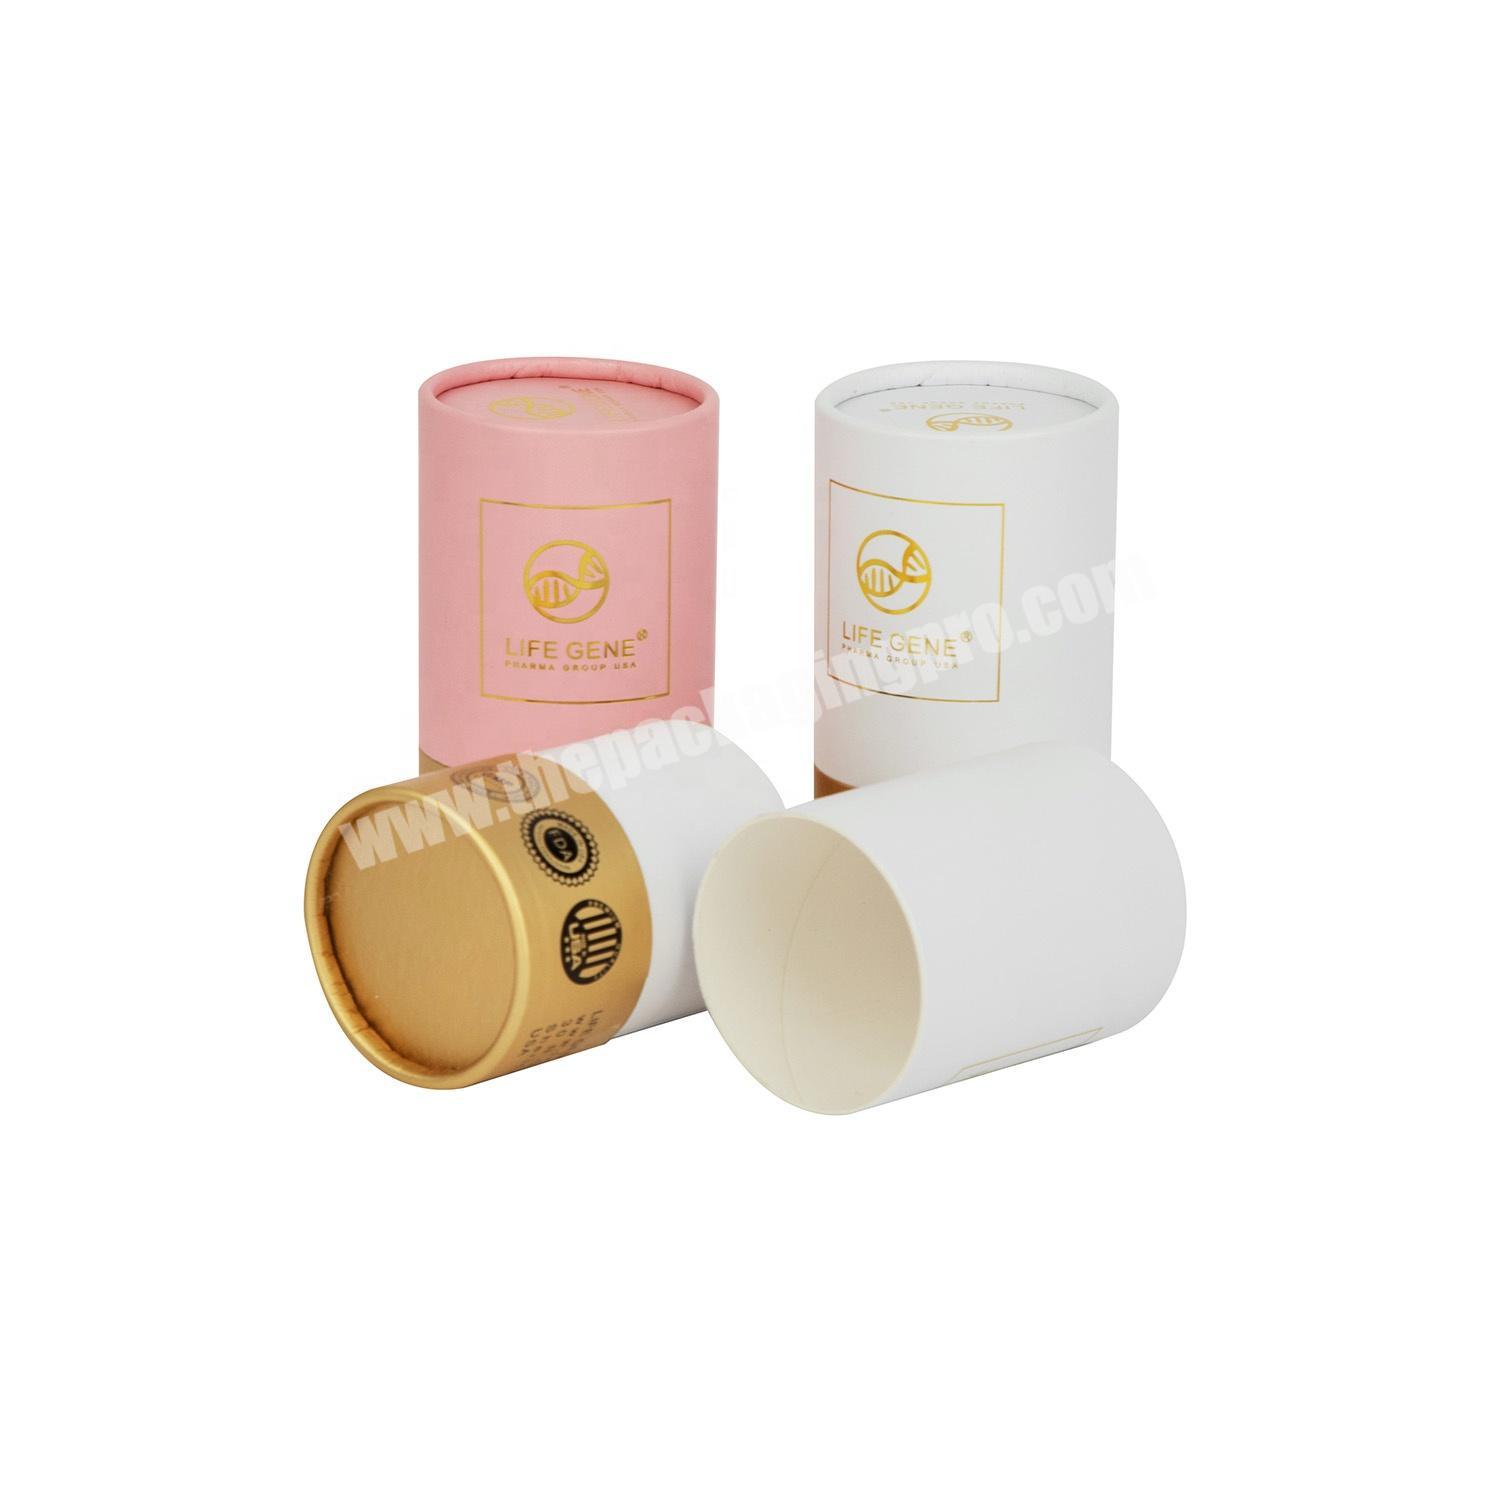 Biodegradable paper cardboard empty lip balm containers deodorant tube